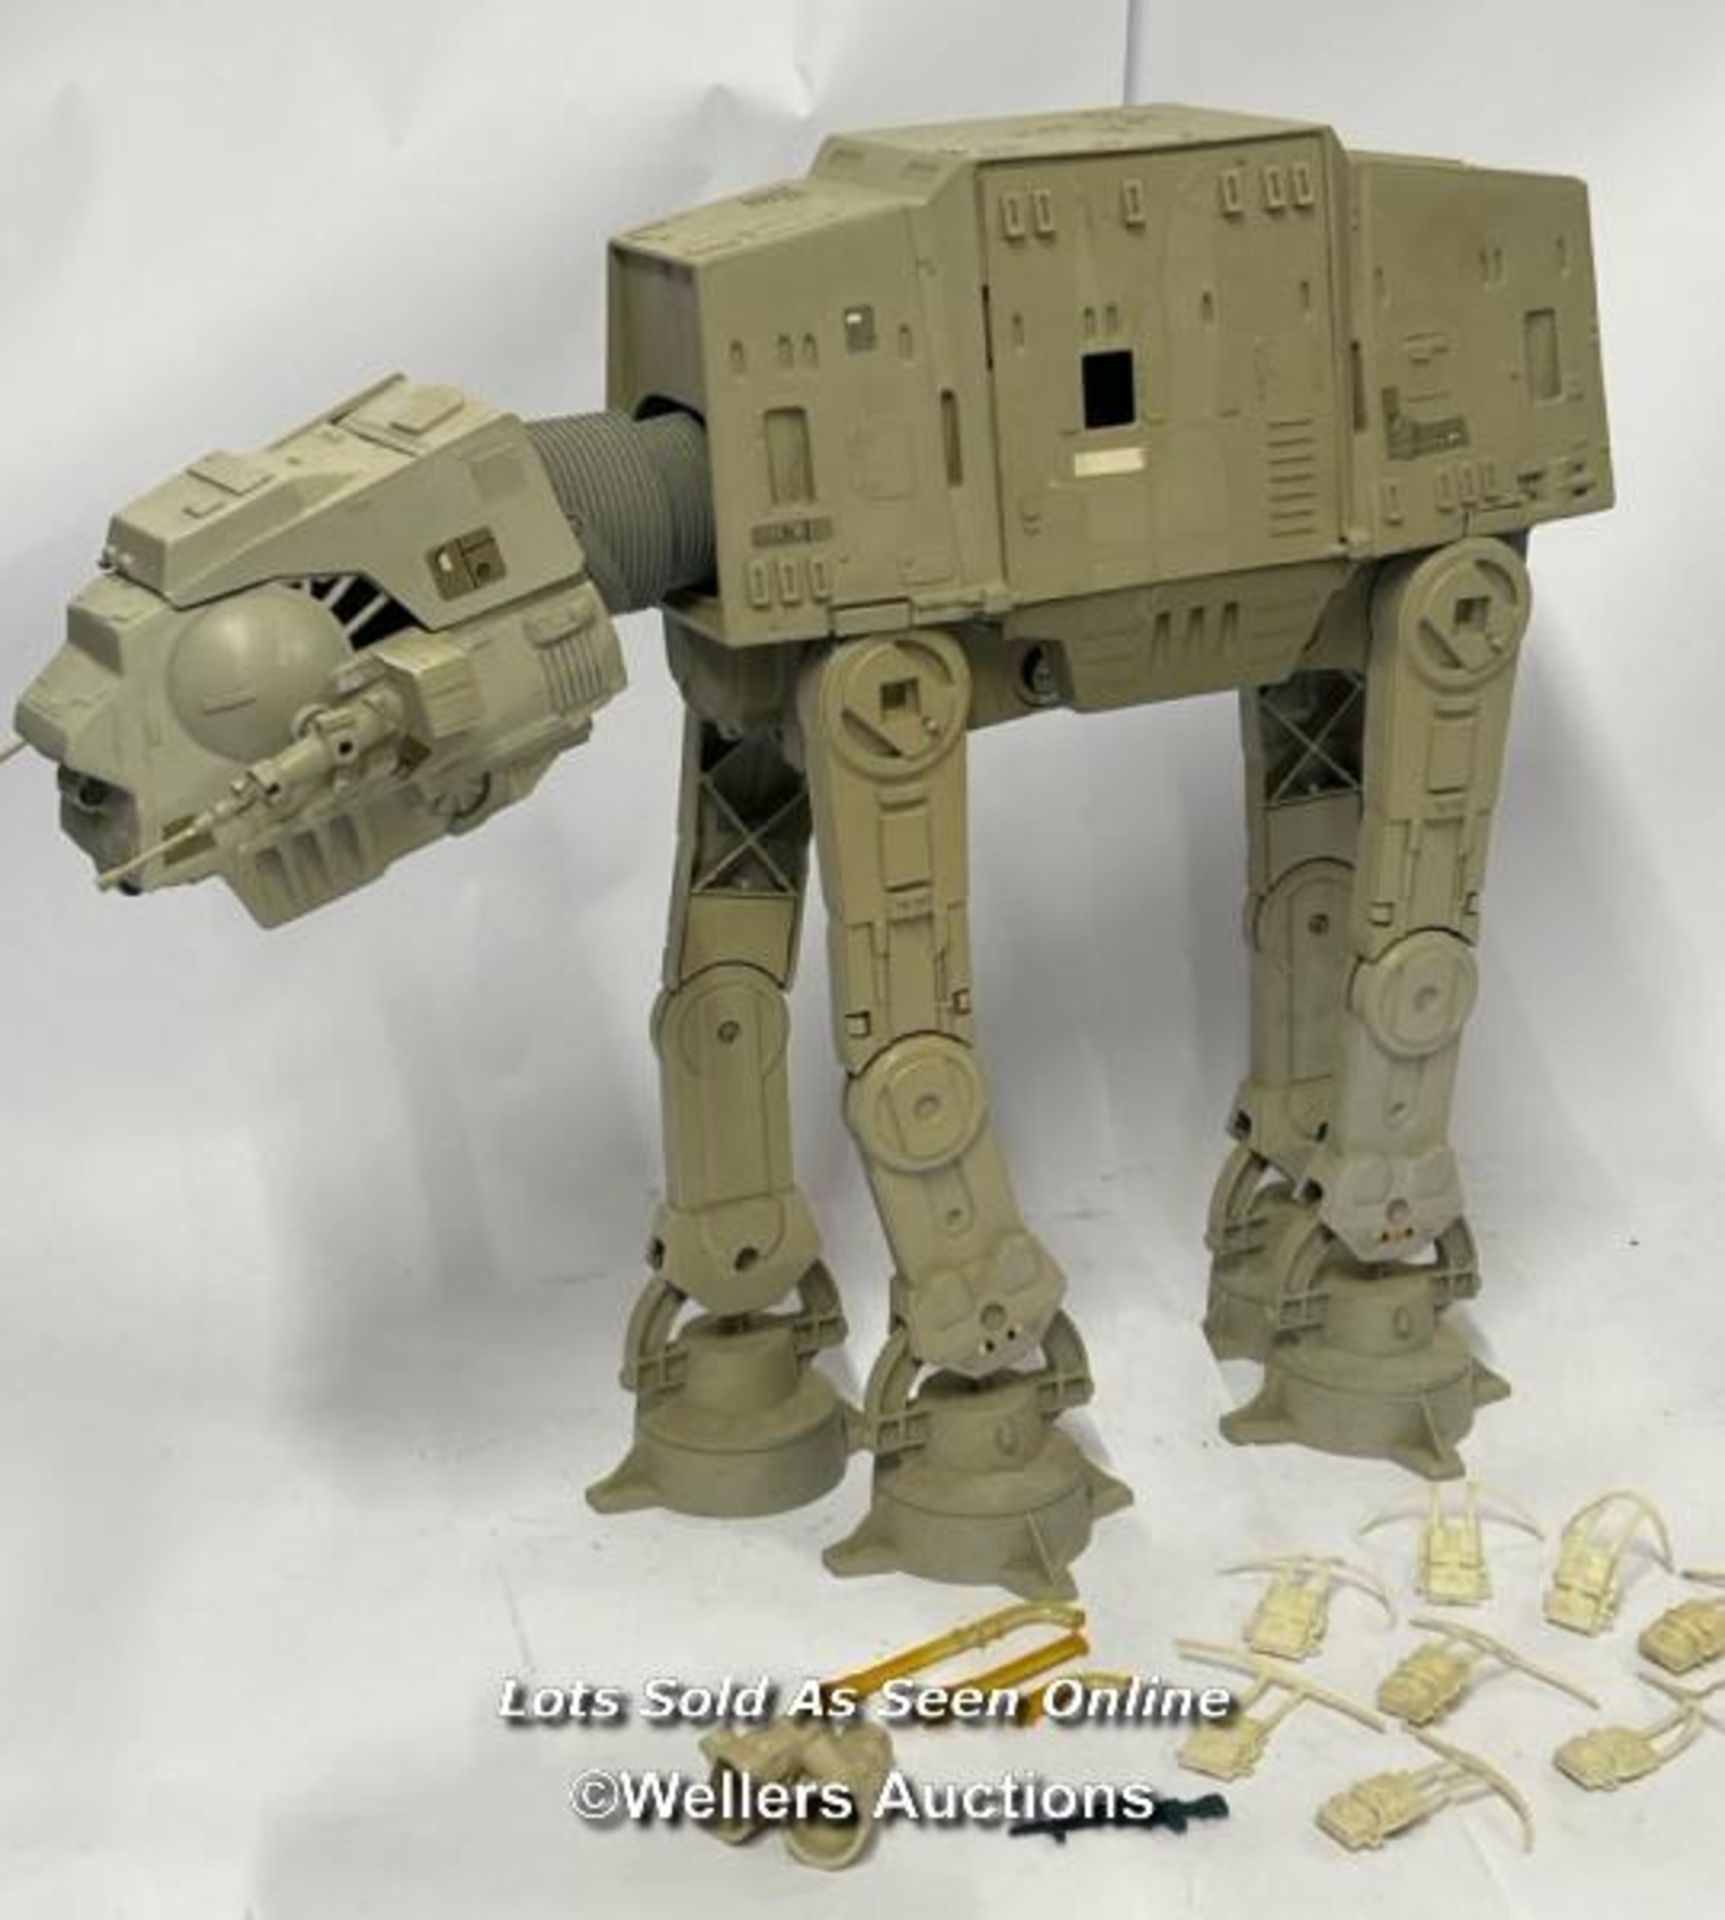 Kenner Star Wars 'The Empire Strikes Back' AT-AT, used condition but complete, chin guns yellowed